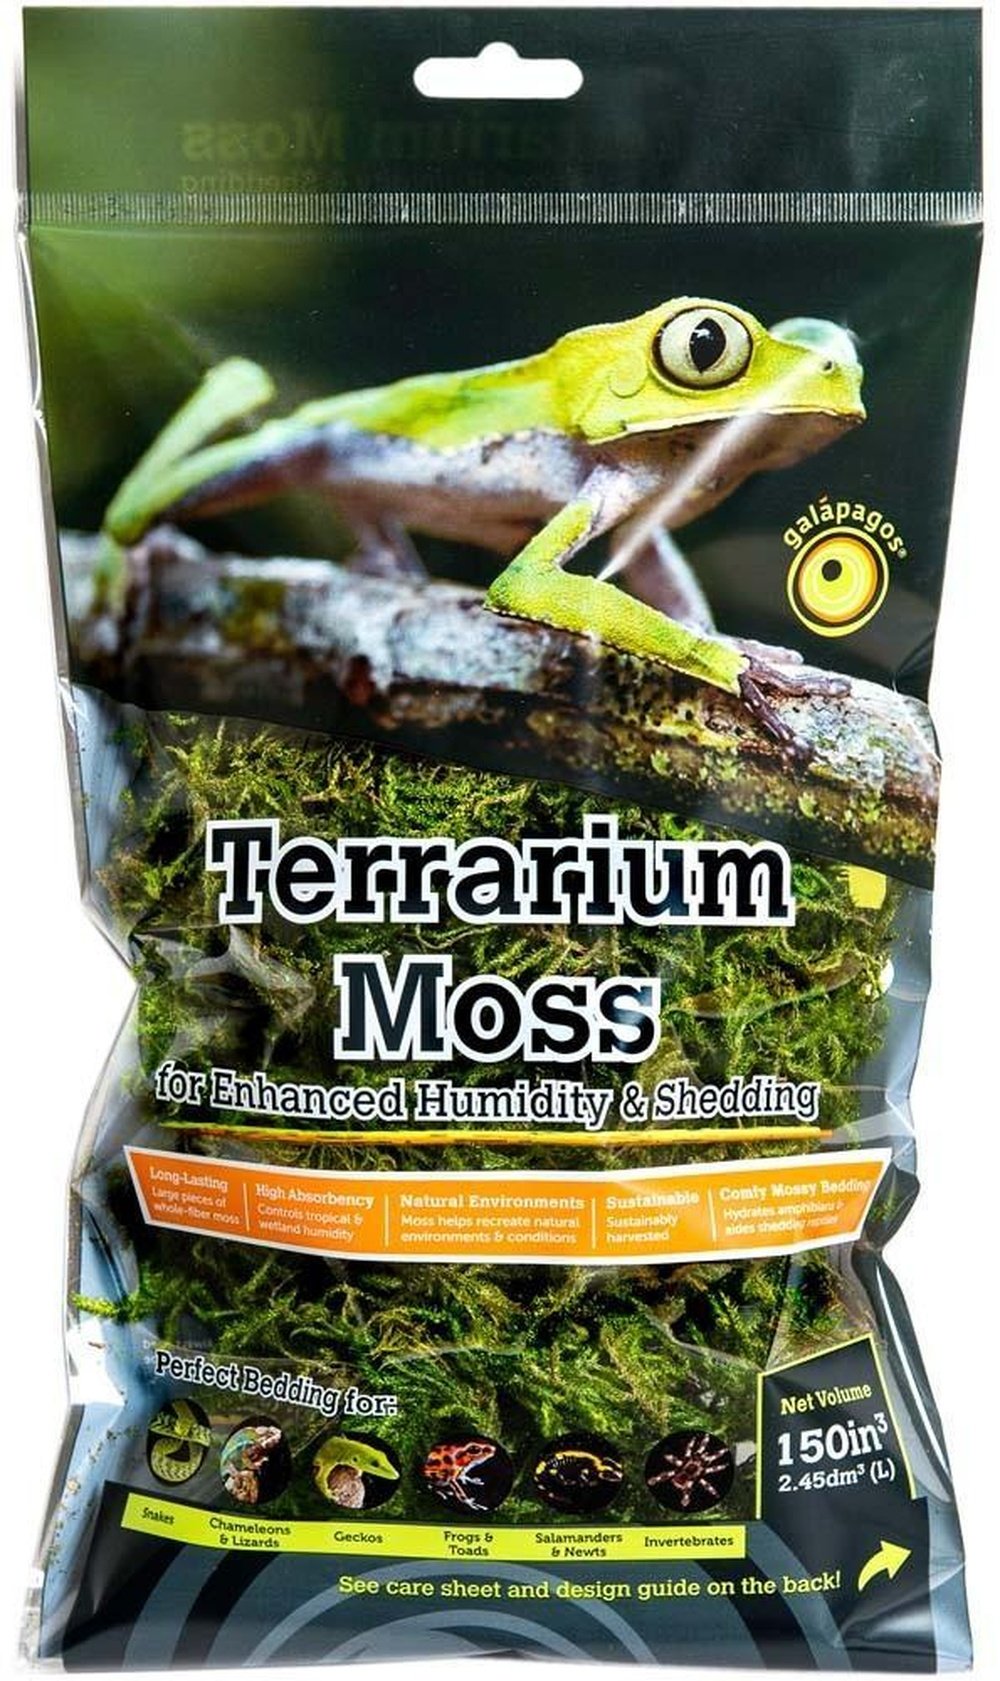 Reptile Substrate - Sphagnum Moss for Reptiles & Amphibians